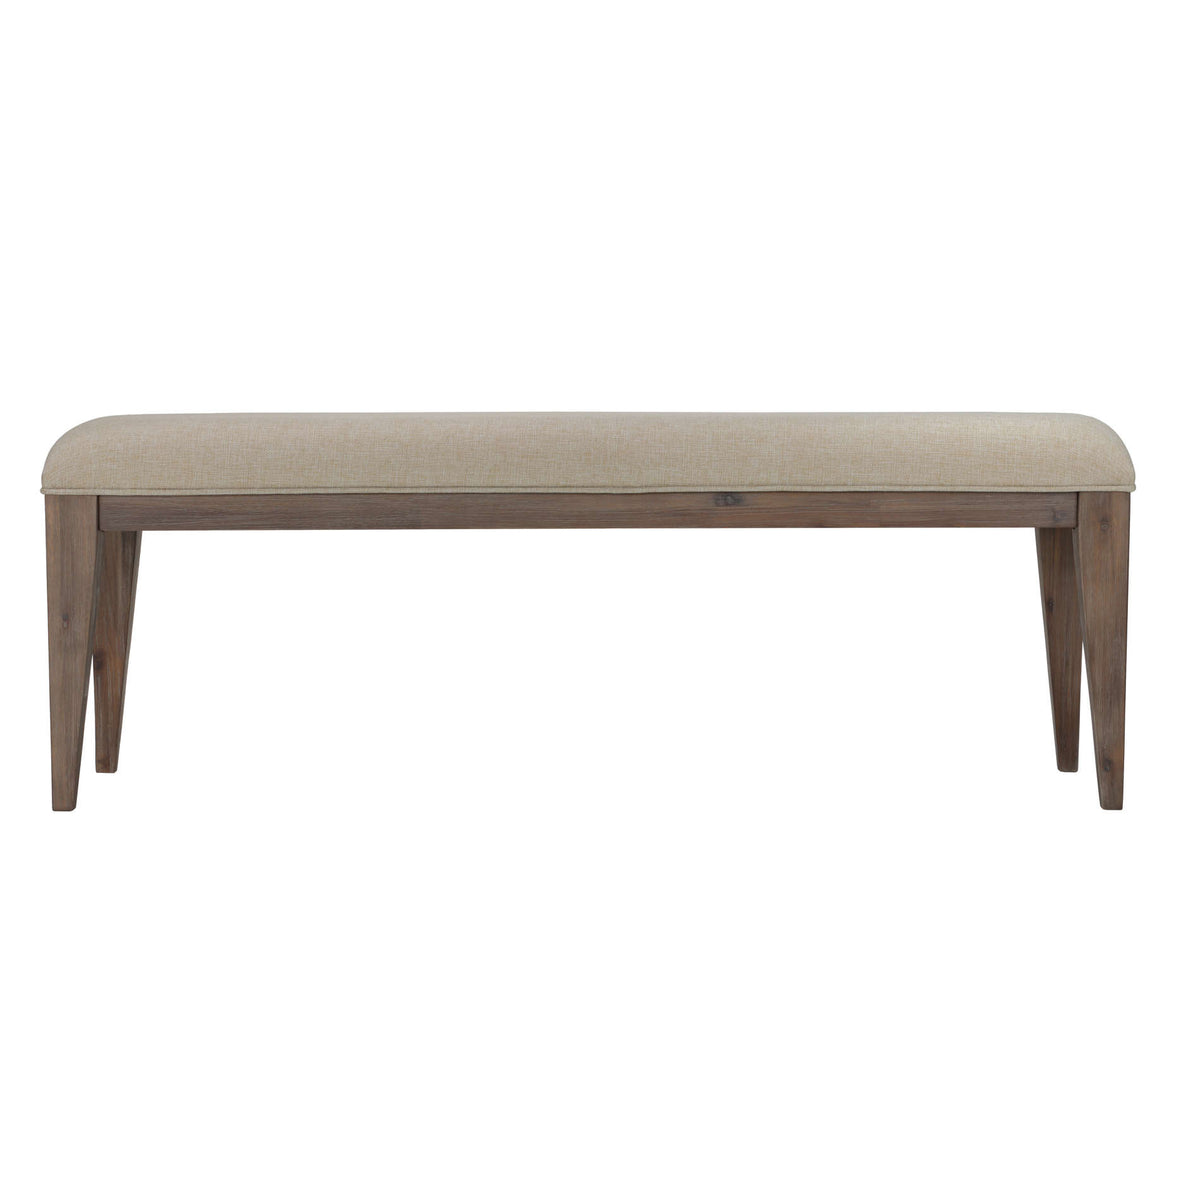 Cortesi Home Leno Bench with Neutral Linen Fabric